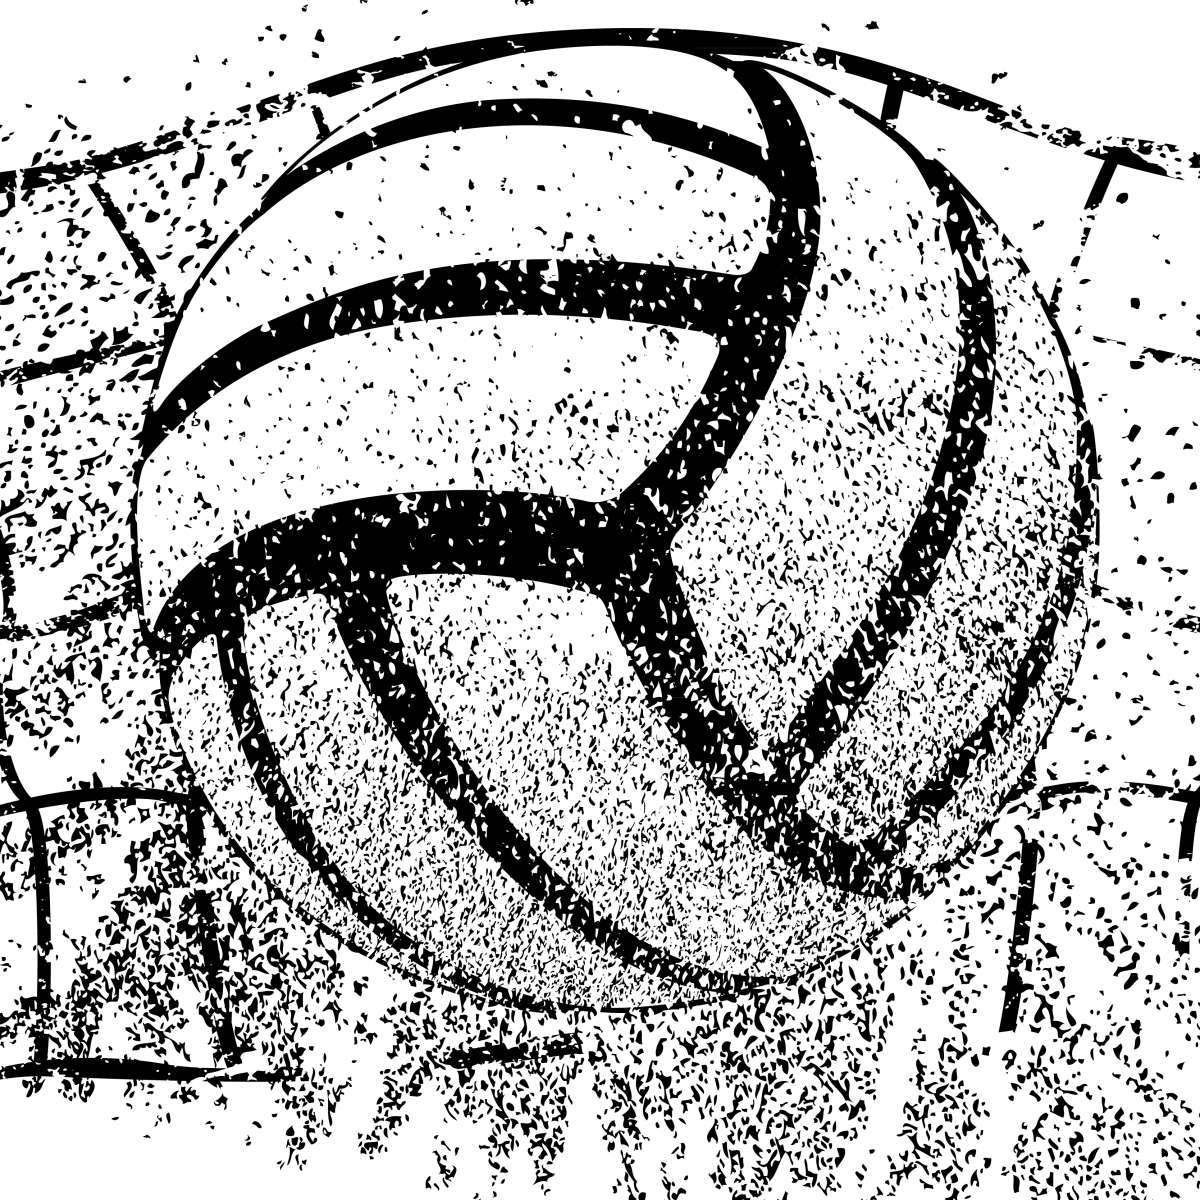 cool volleyball drawings